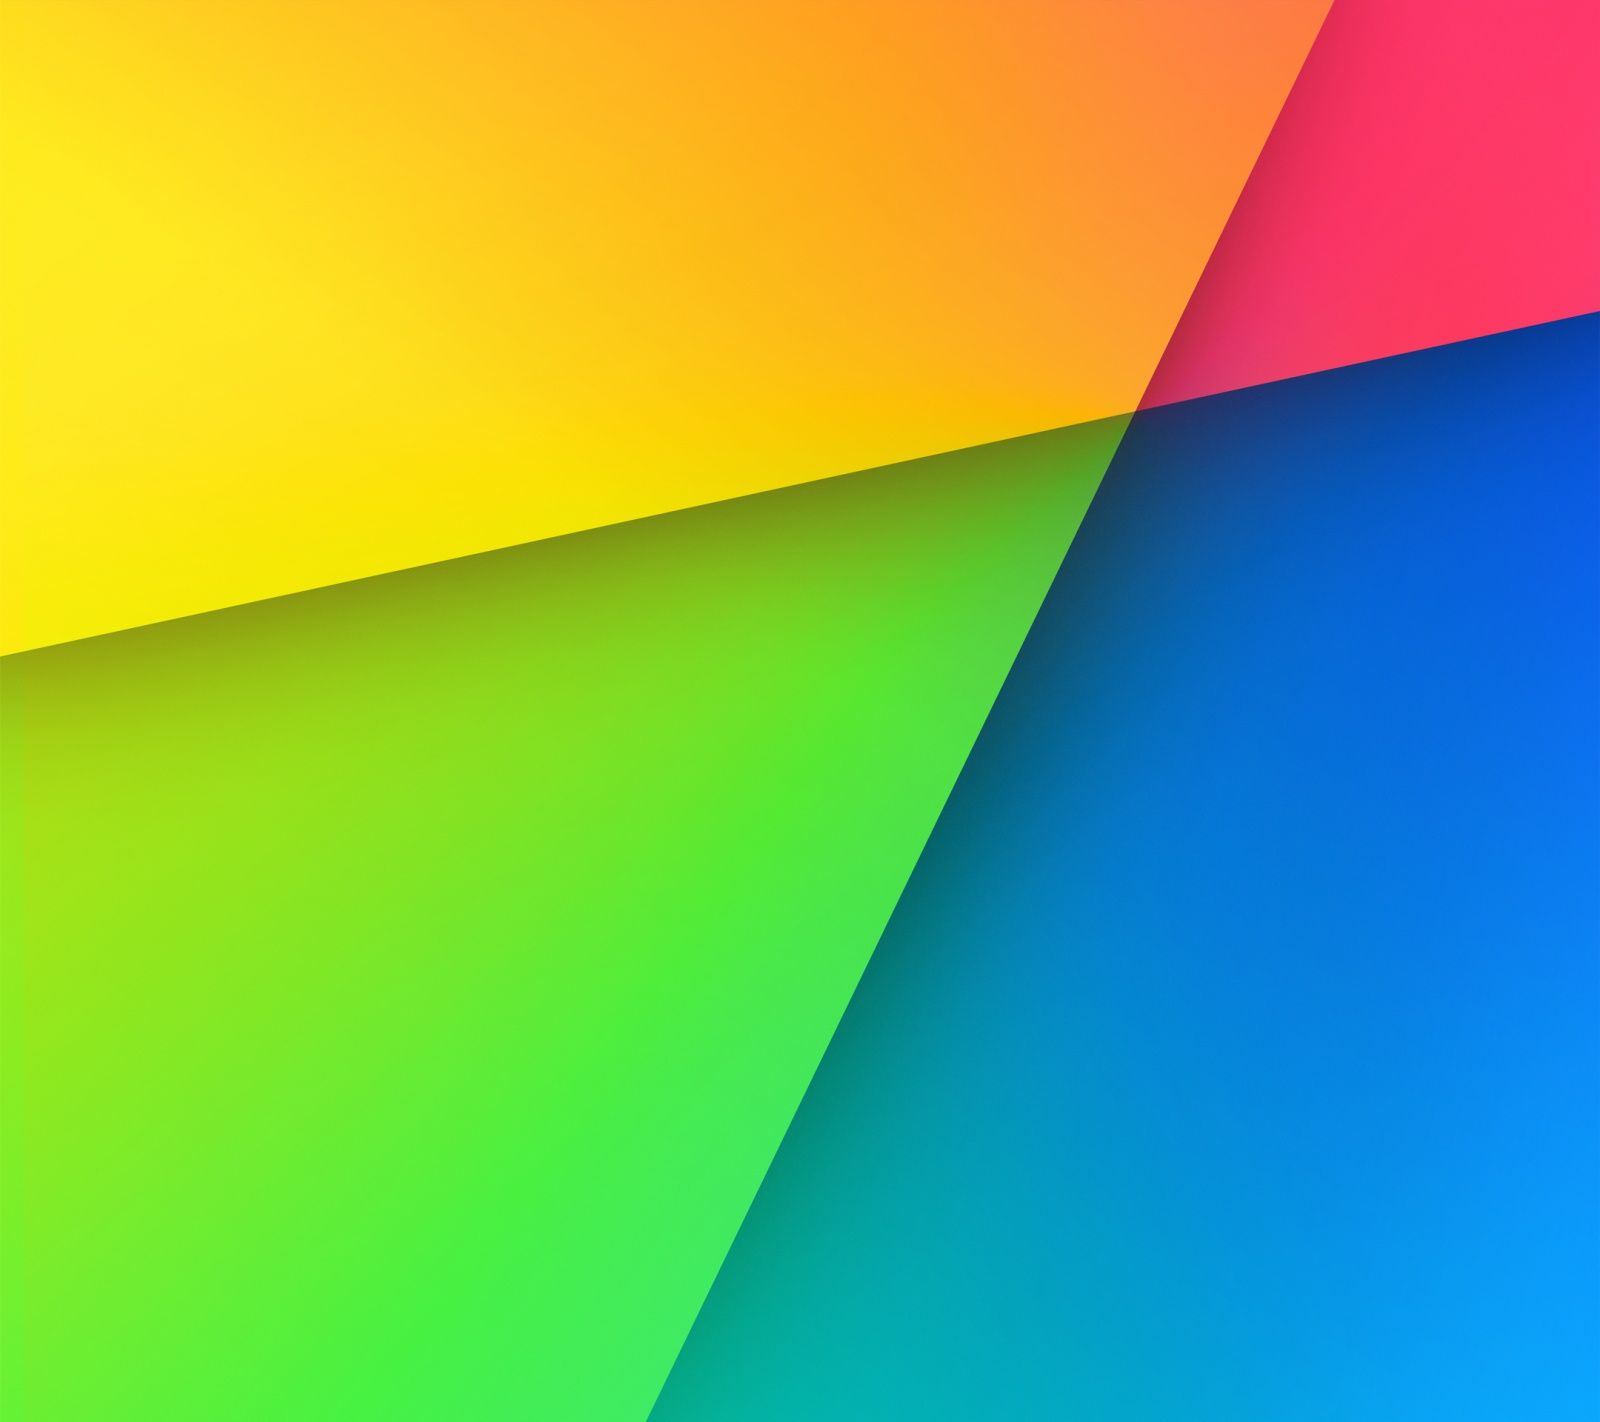 Cult of Android - Download The New Android 4.3 Wallpaper For Your ...